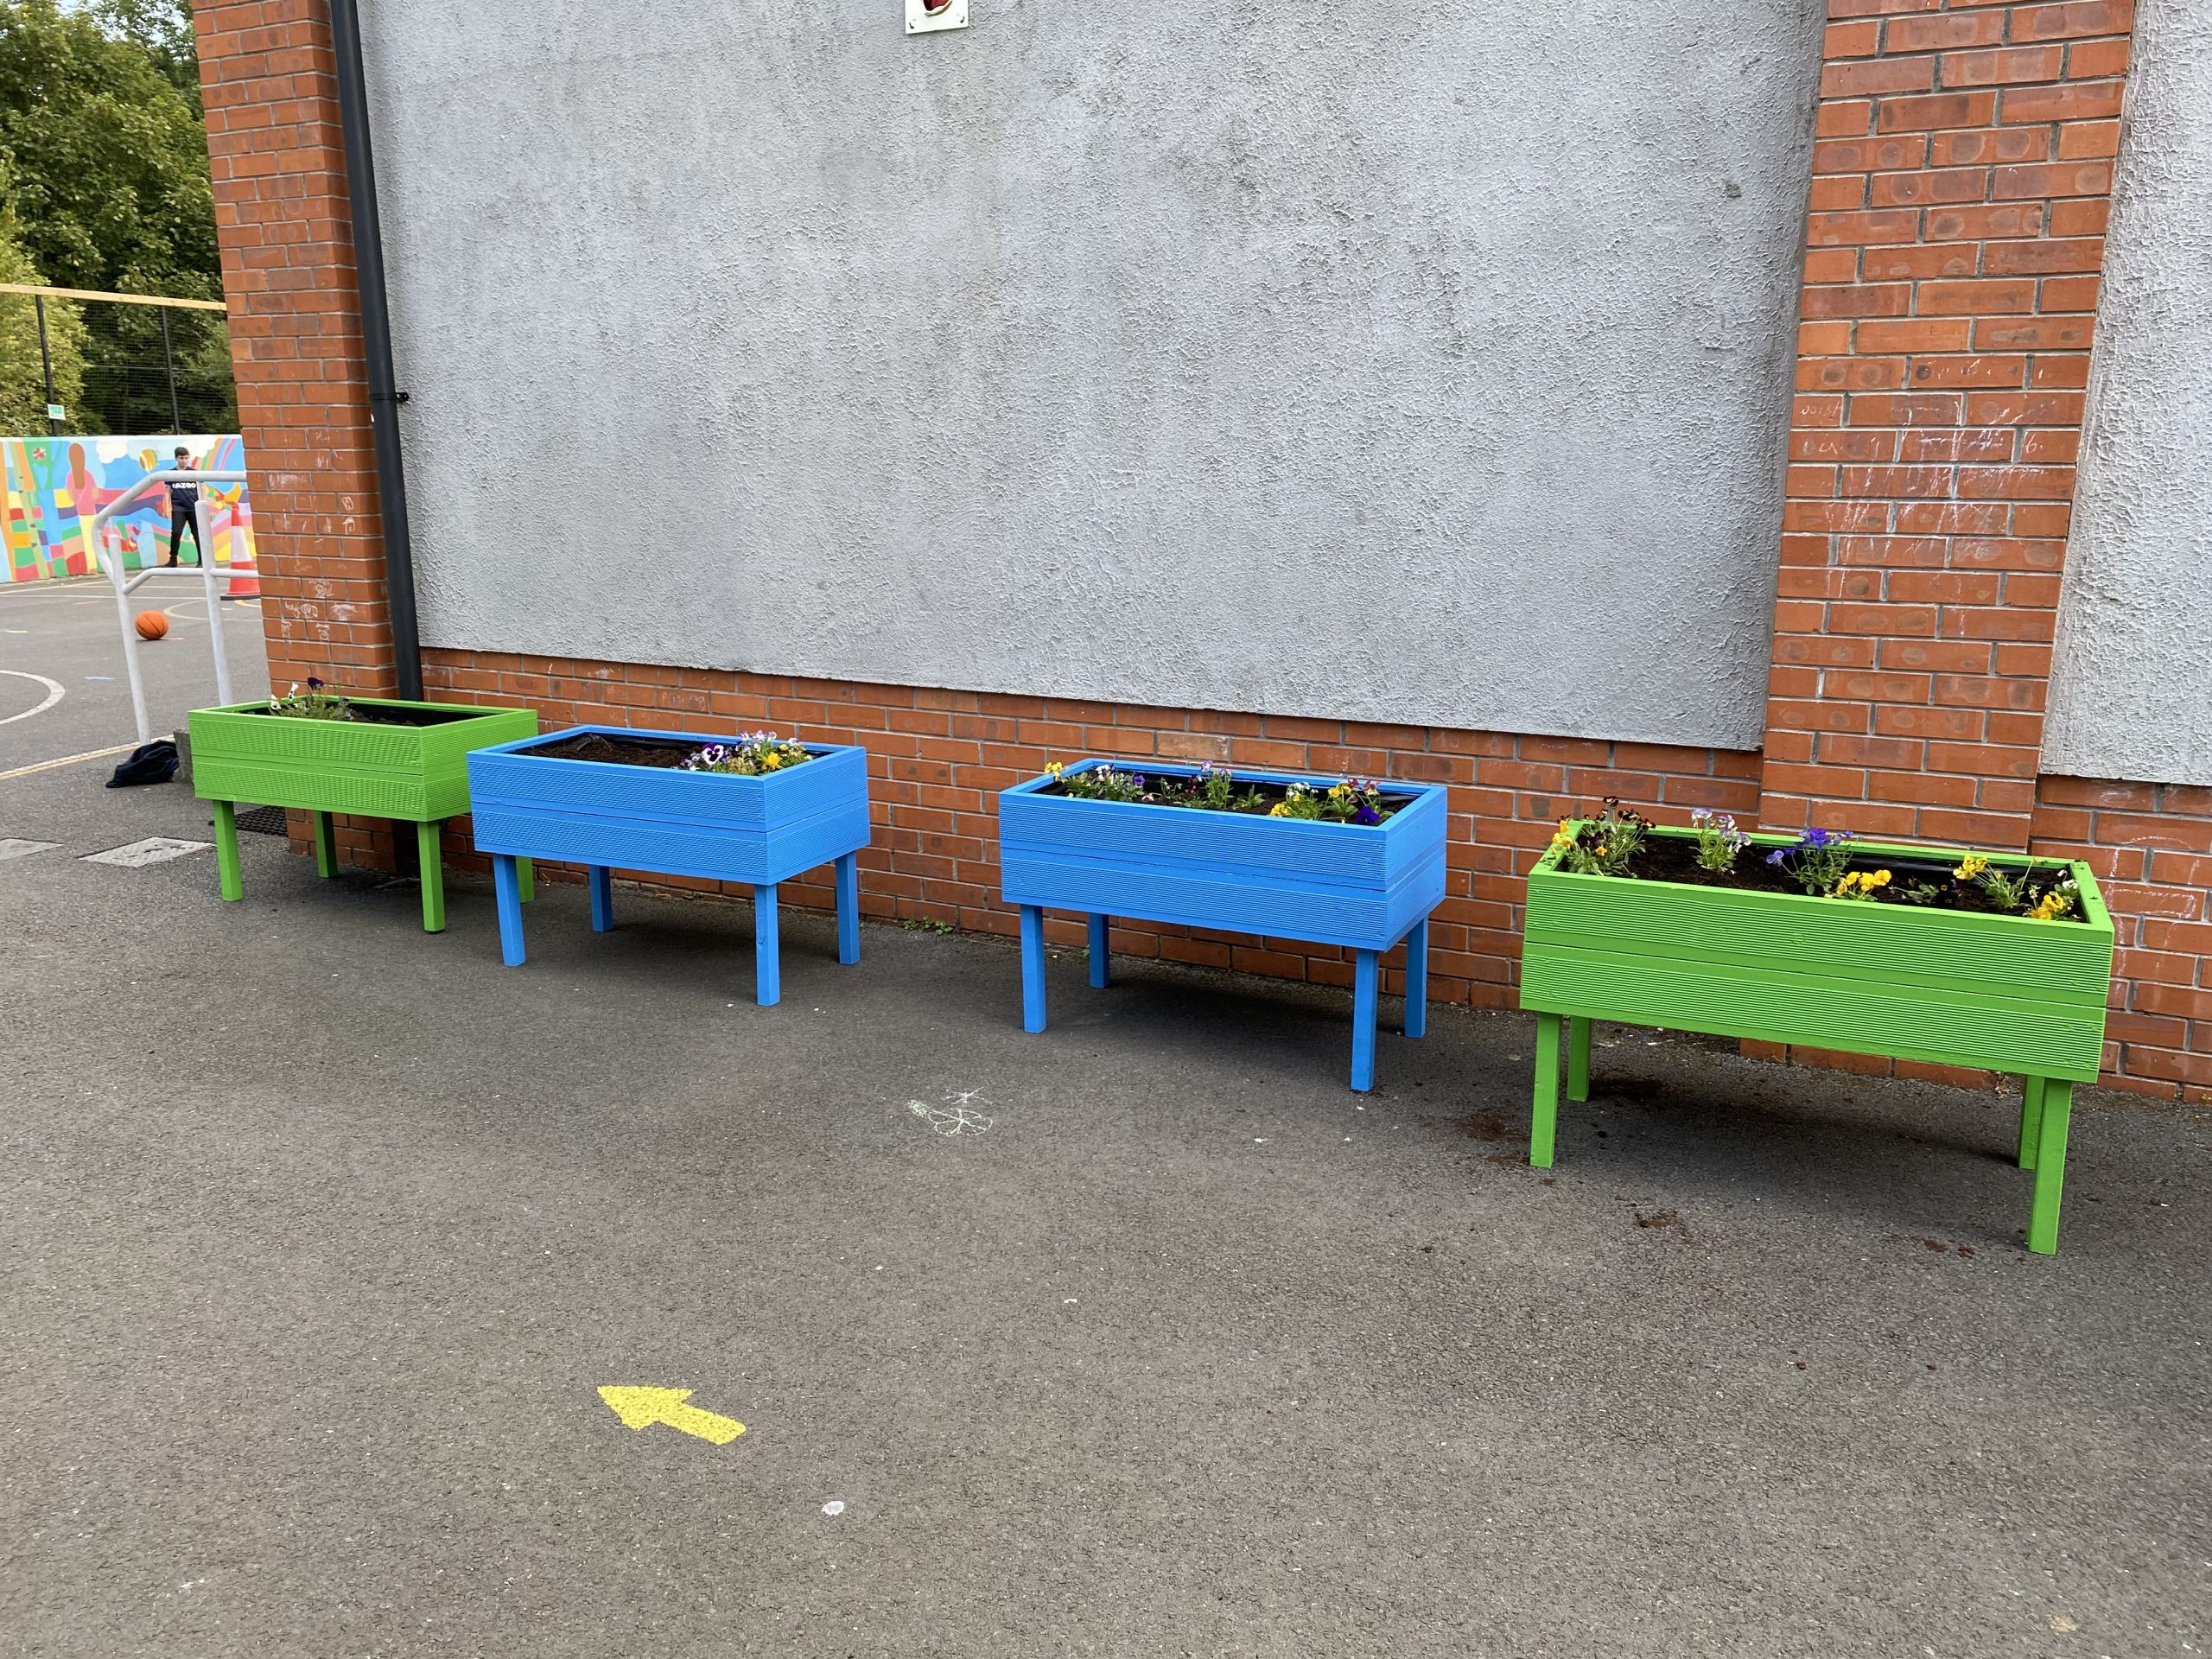 Nature in G.N.S. All Classes planted Winter Lettuce & Shrubs in their class planters!